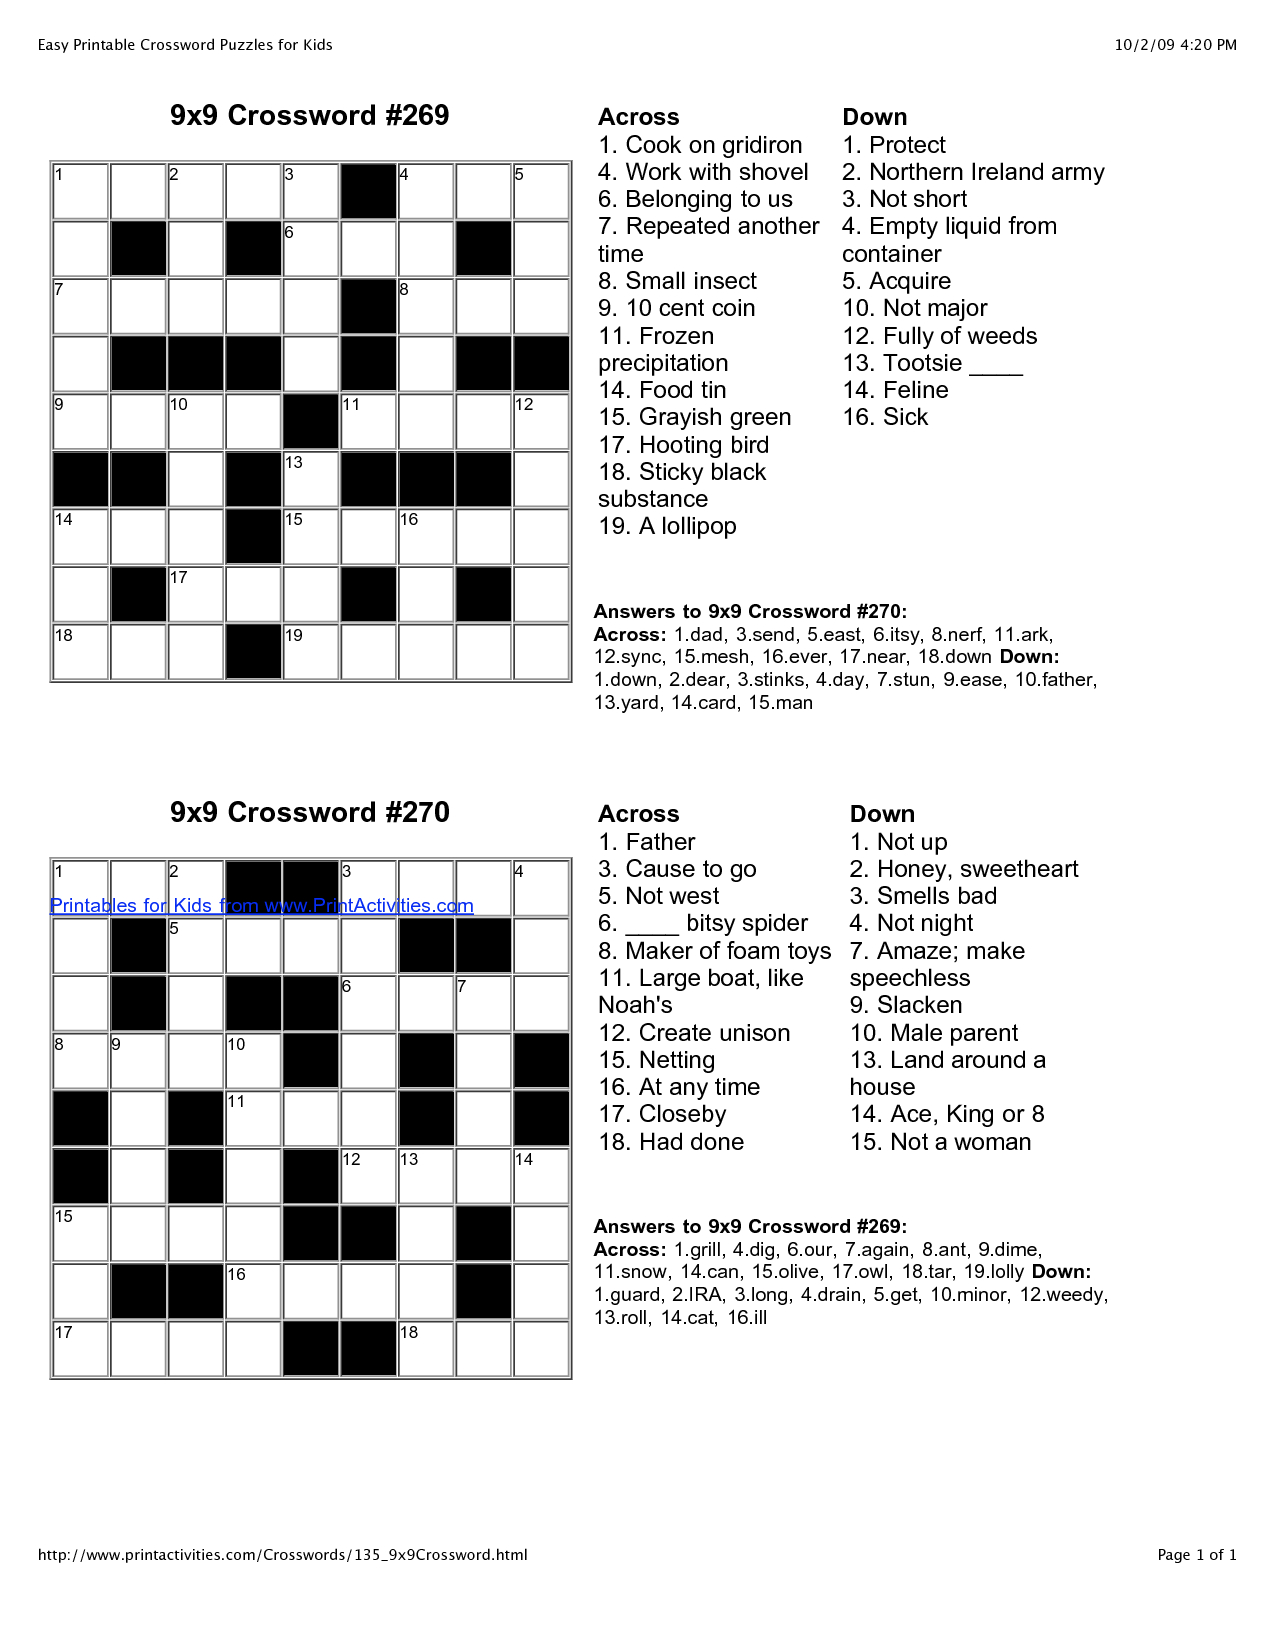 Easy Crossword Puzzles | I&amp;#039;m Going To Be An Slp! | Kids Crossword - Printable Puzzles To Do At Work